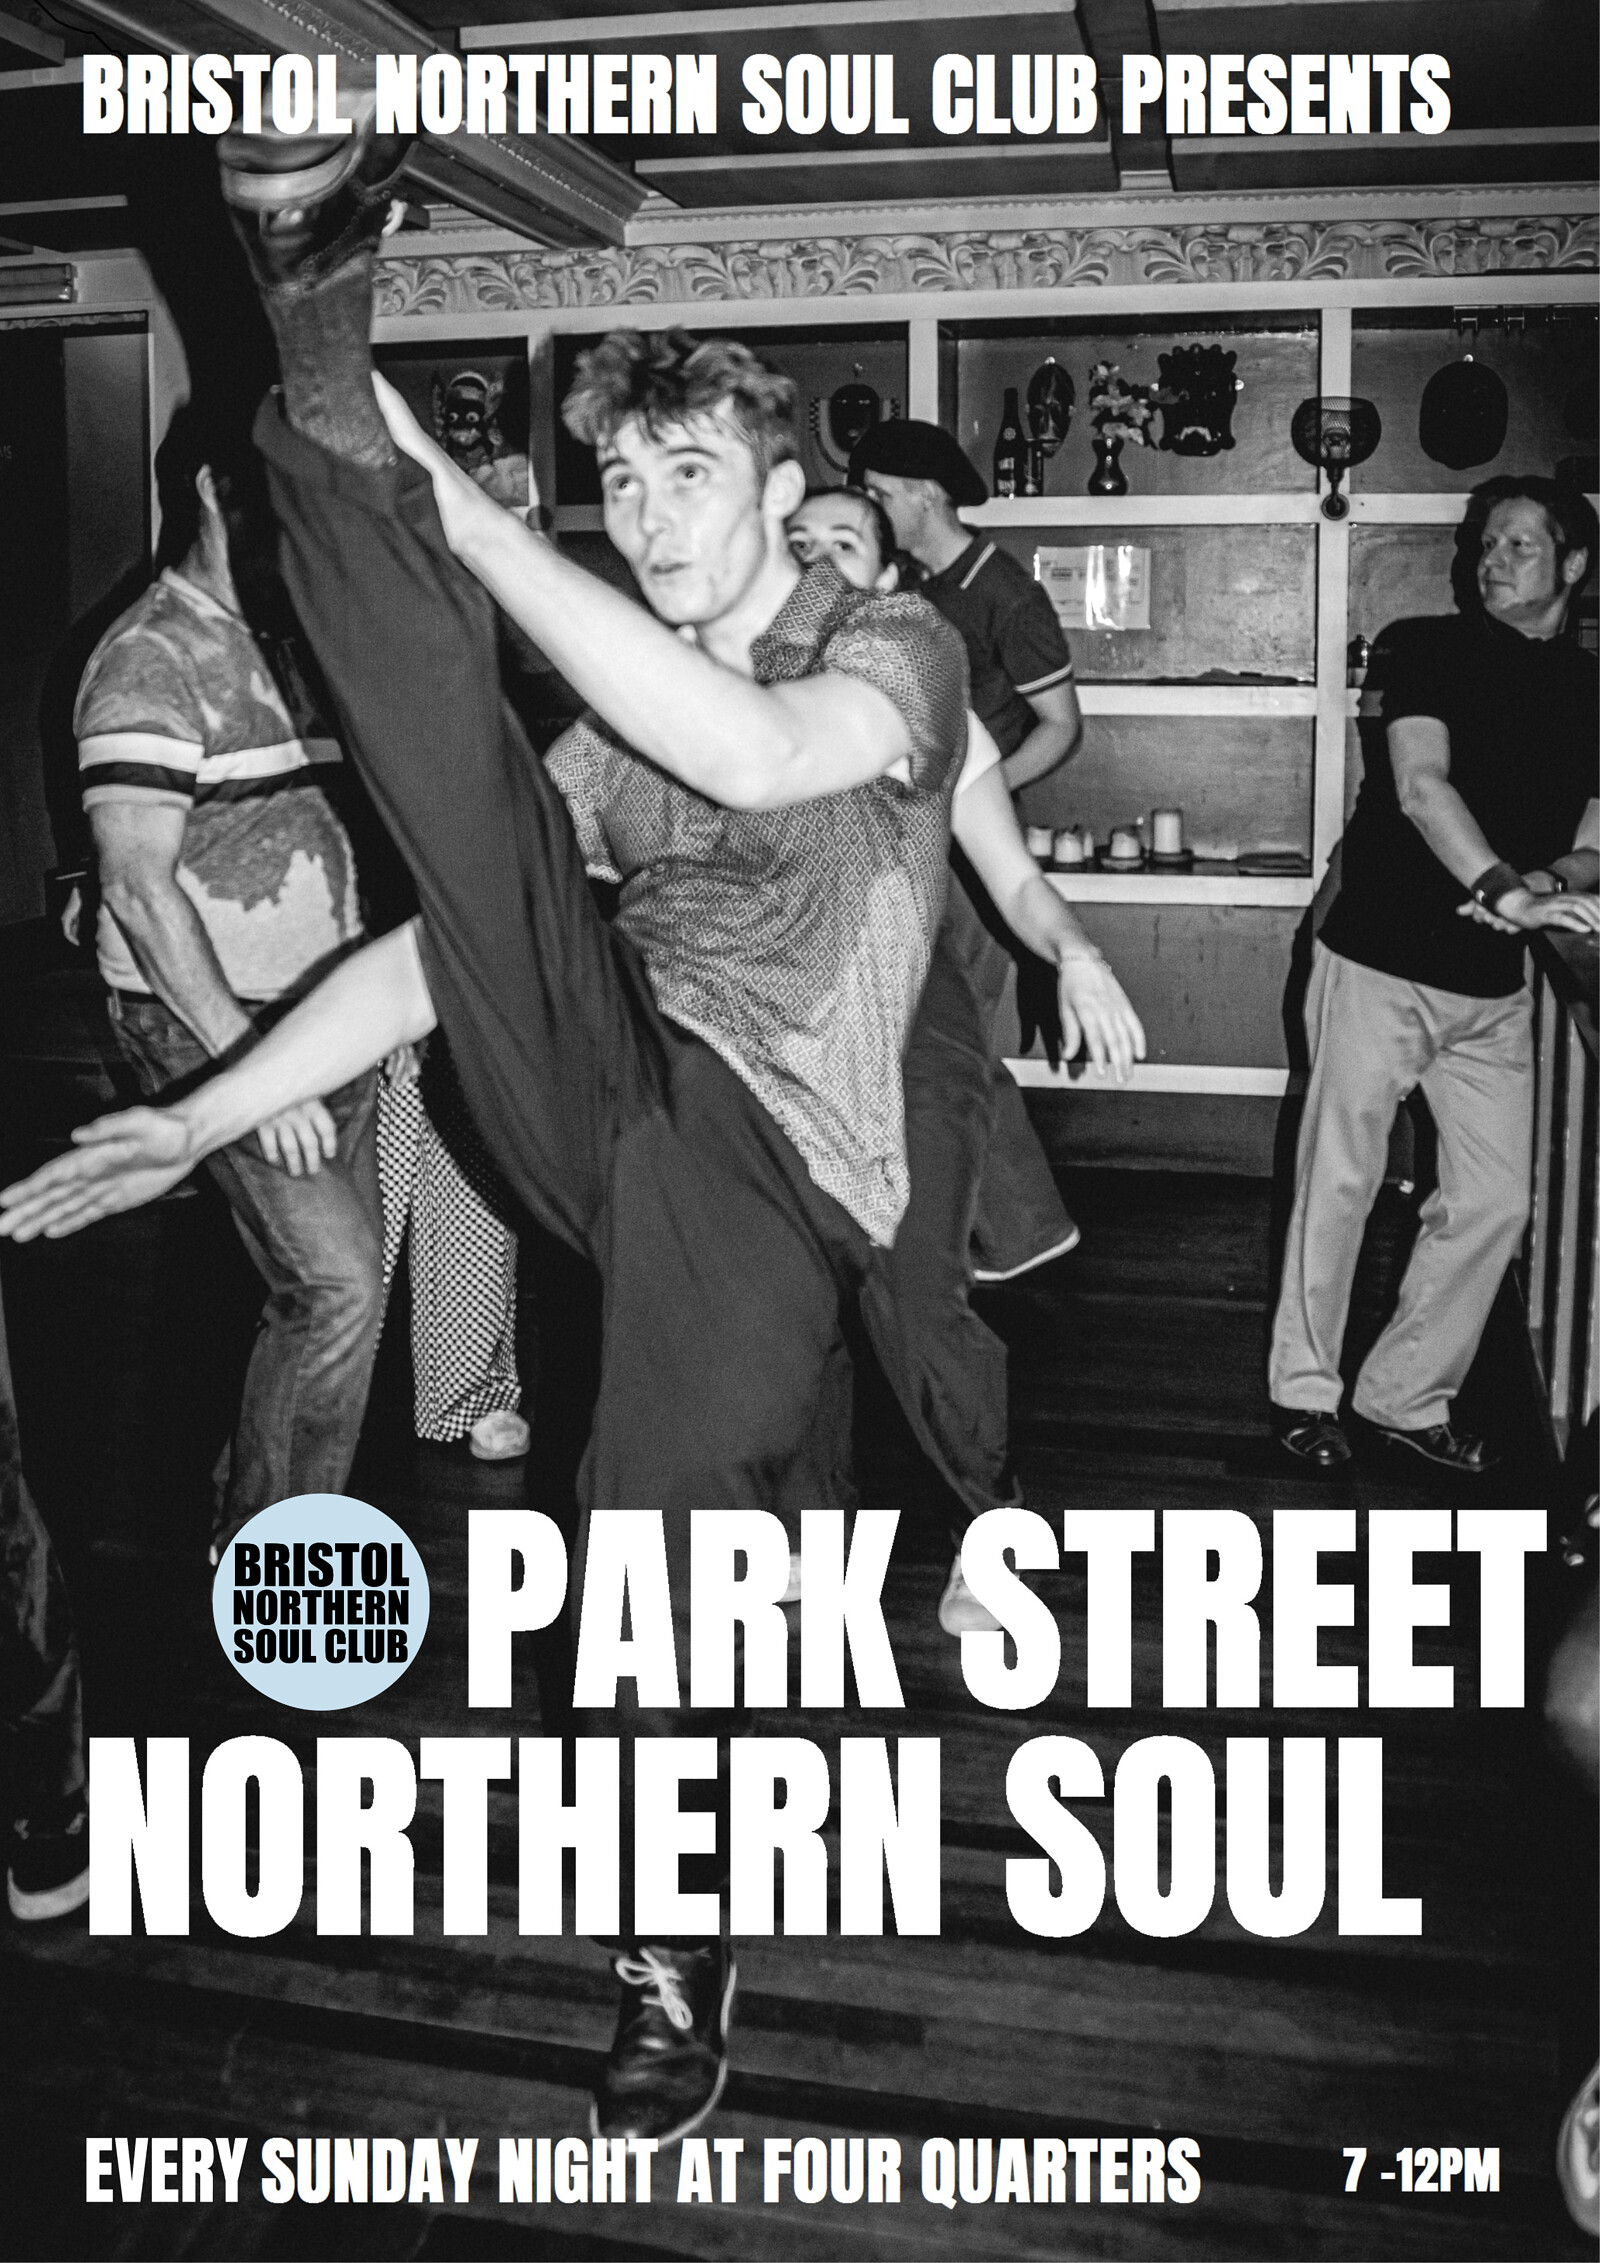 PARK STREET NORTHERN SOUL at Four Quarters